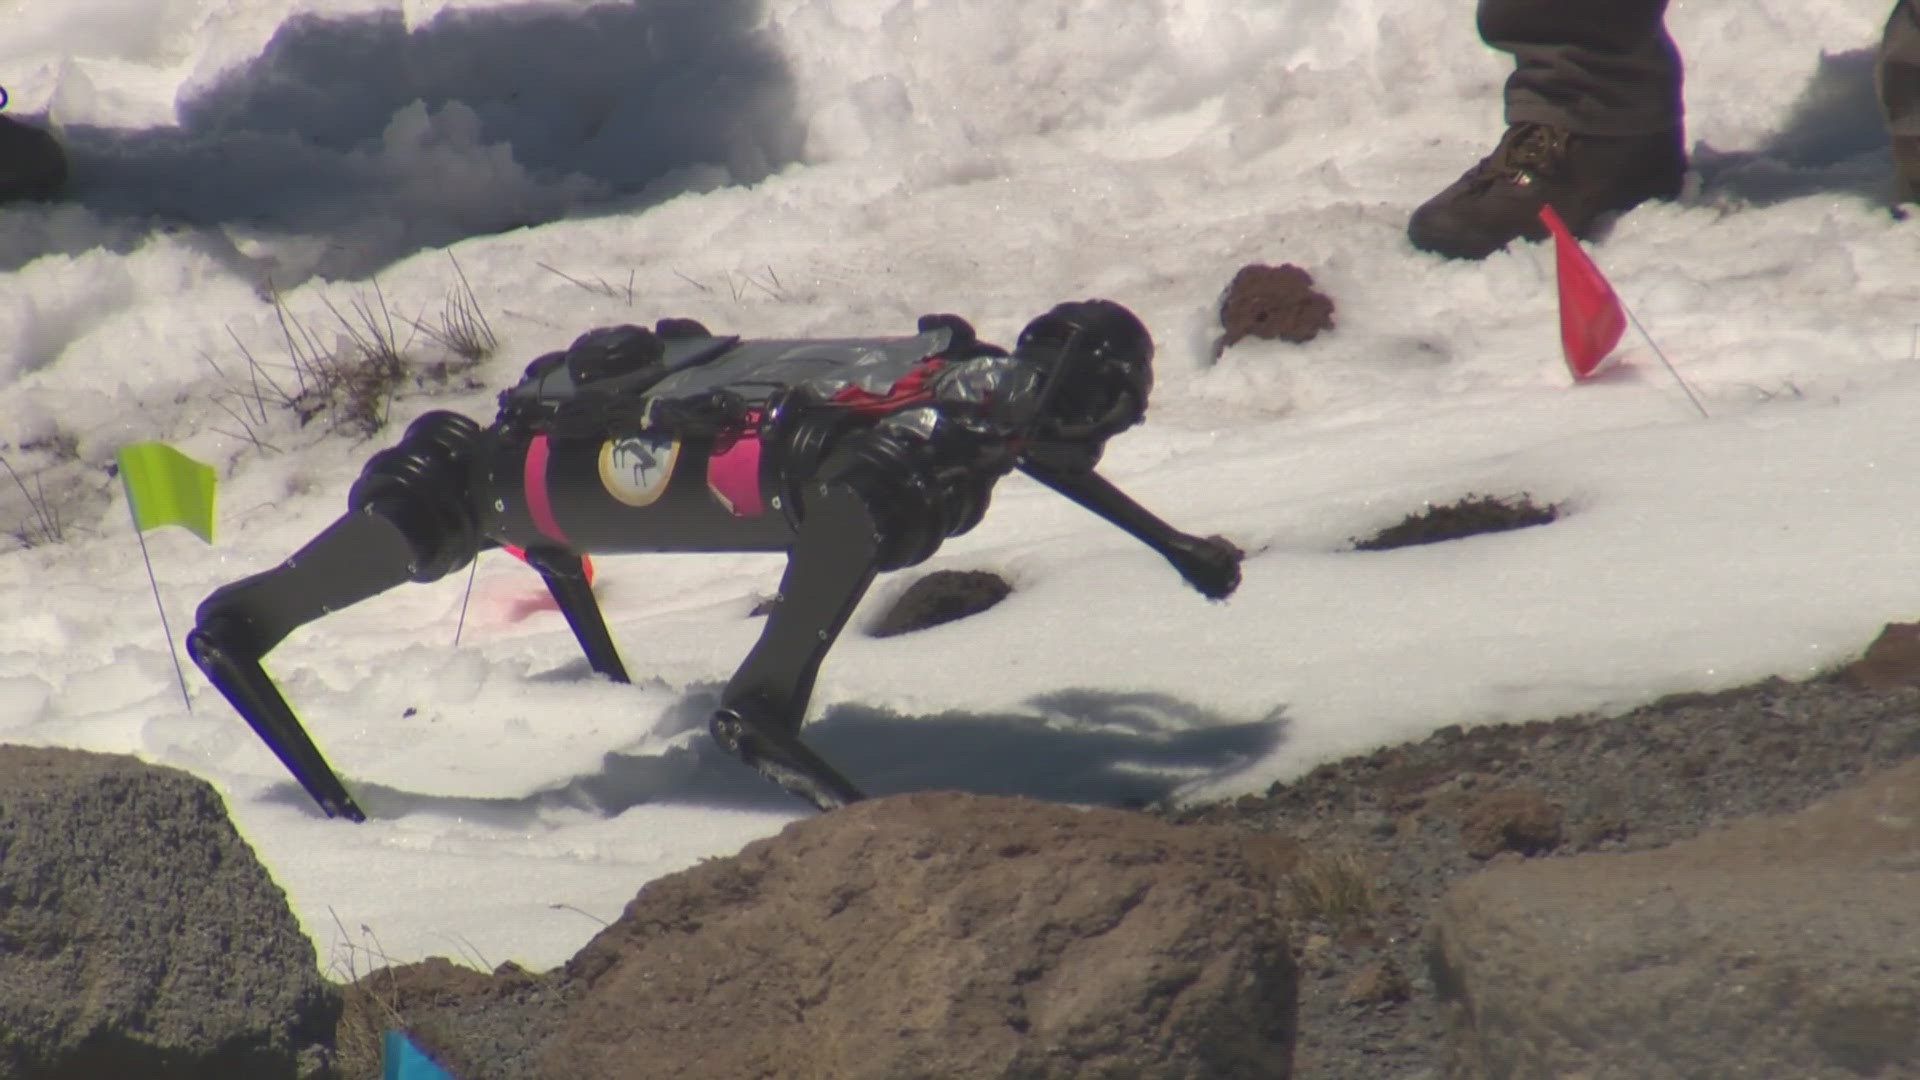 Researchers are using a quadrupedal robot named "Spirit" to simulate the moon's surface at Mt. Hood